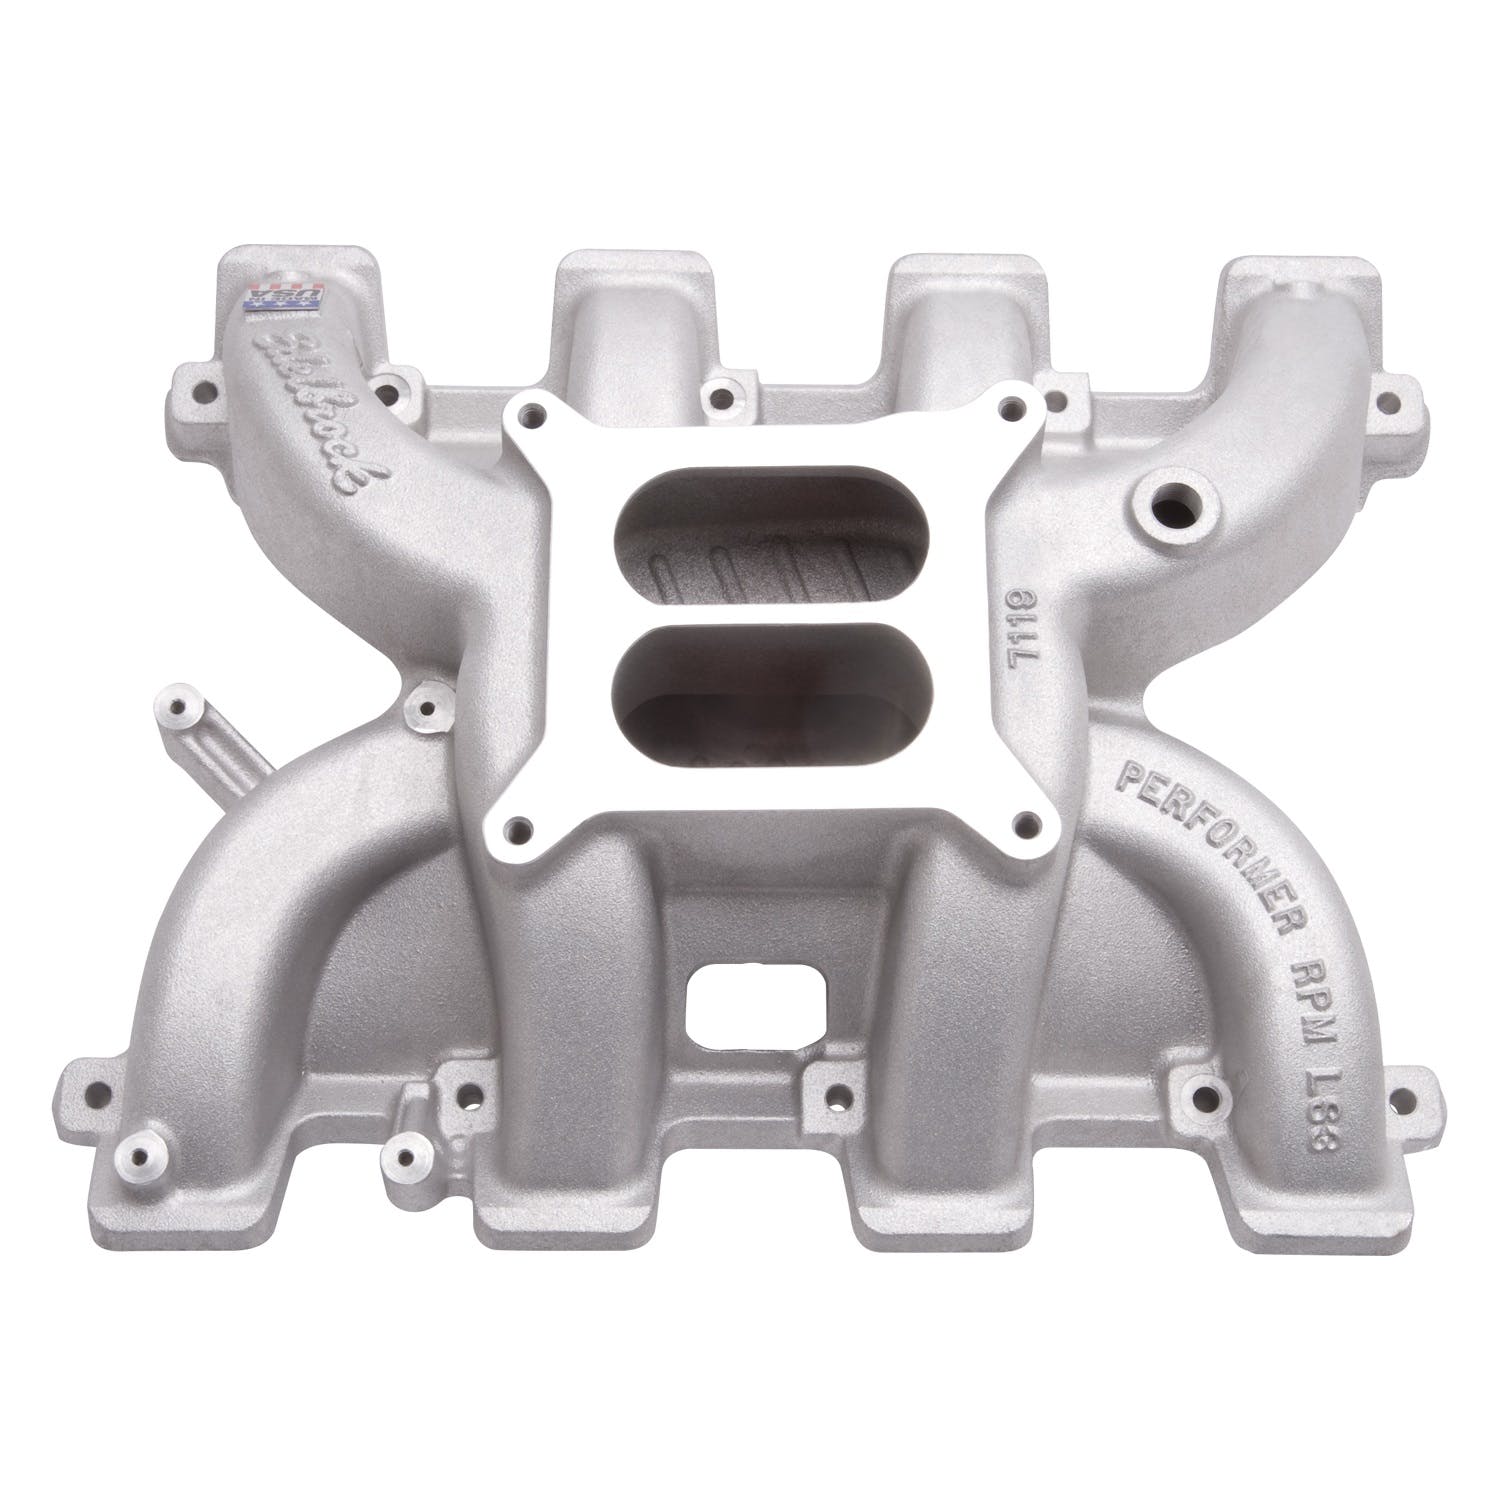 Edelbrock 71197 MANIFOLD PERF RPM FOR GM LS3 CARBURATED (MANIFOLD ONLY)